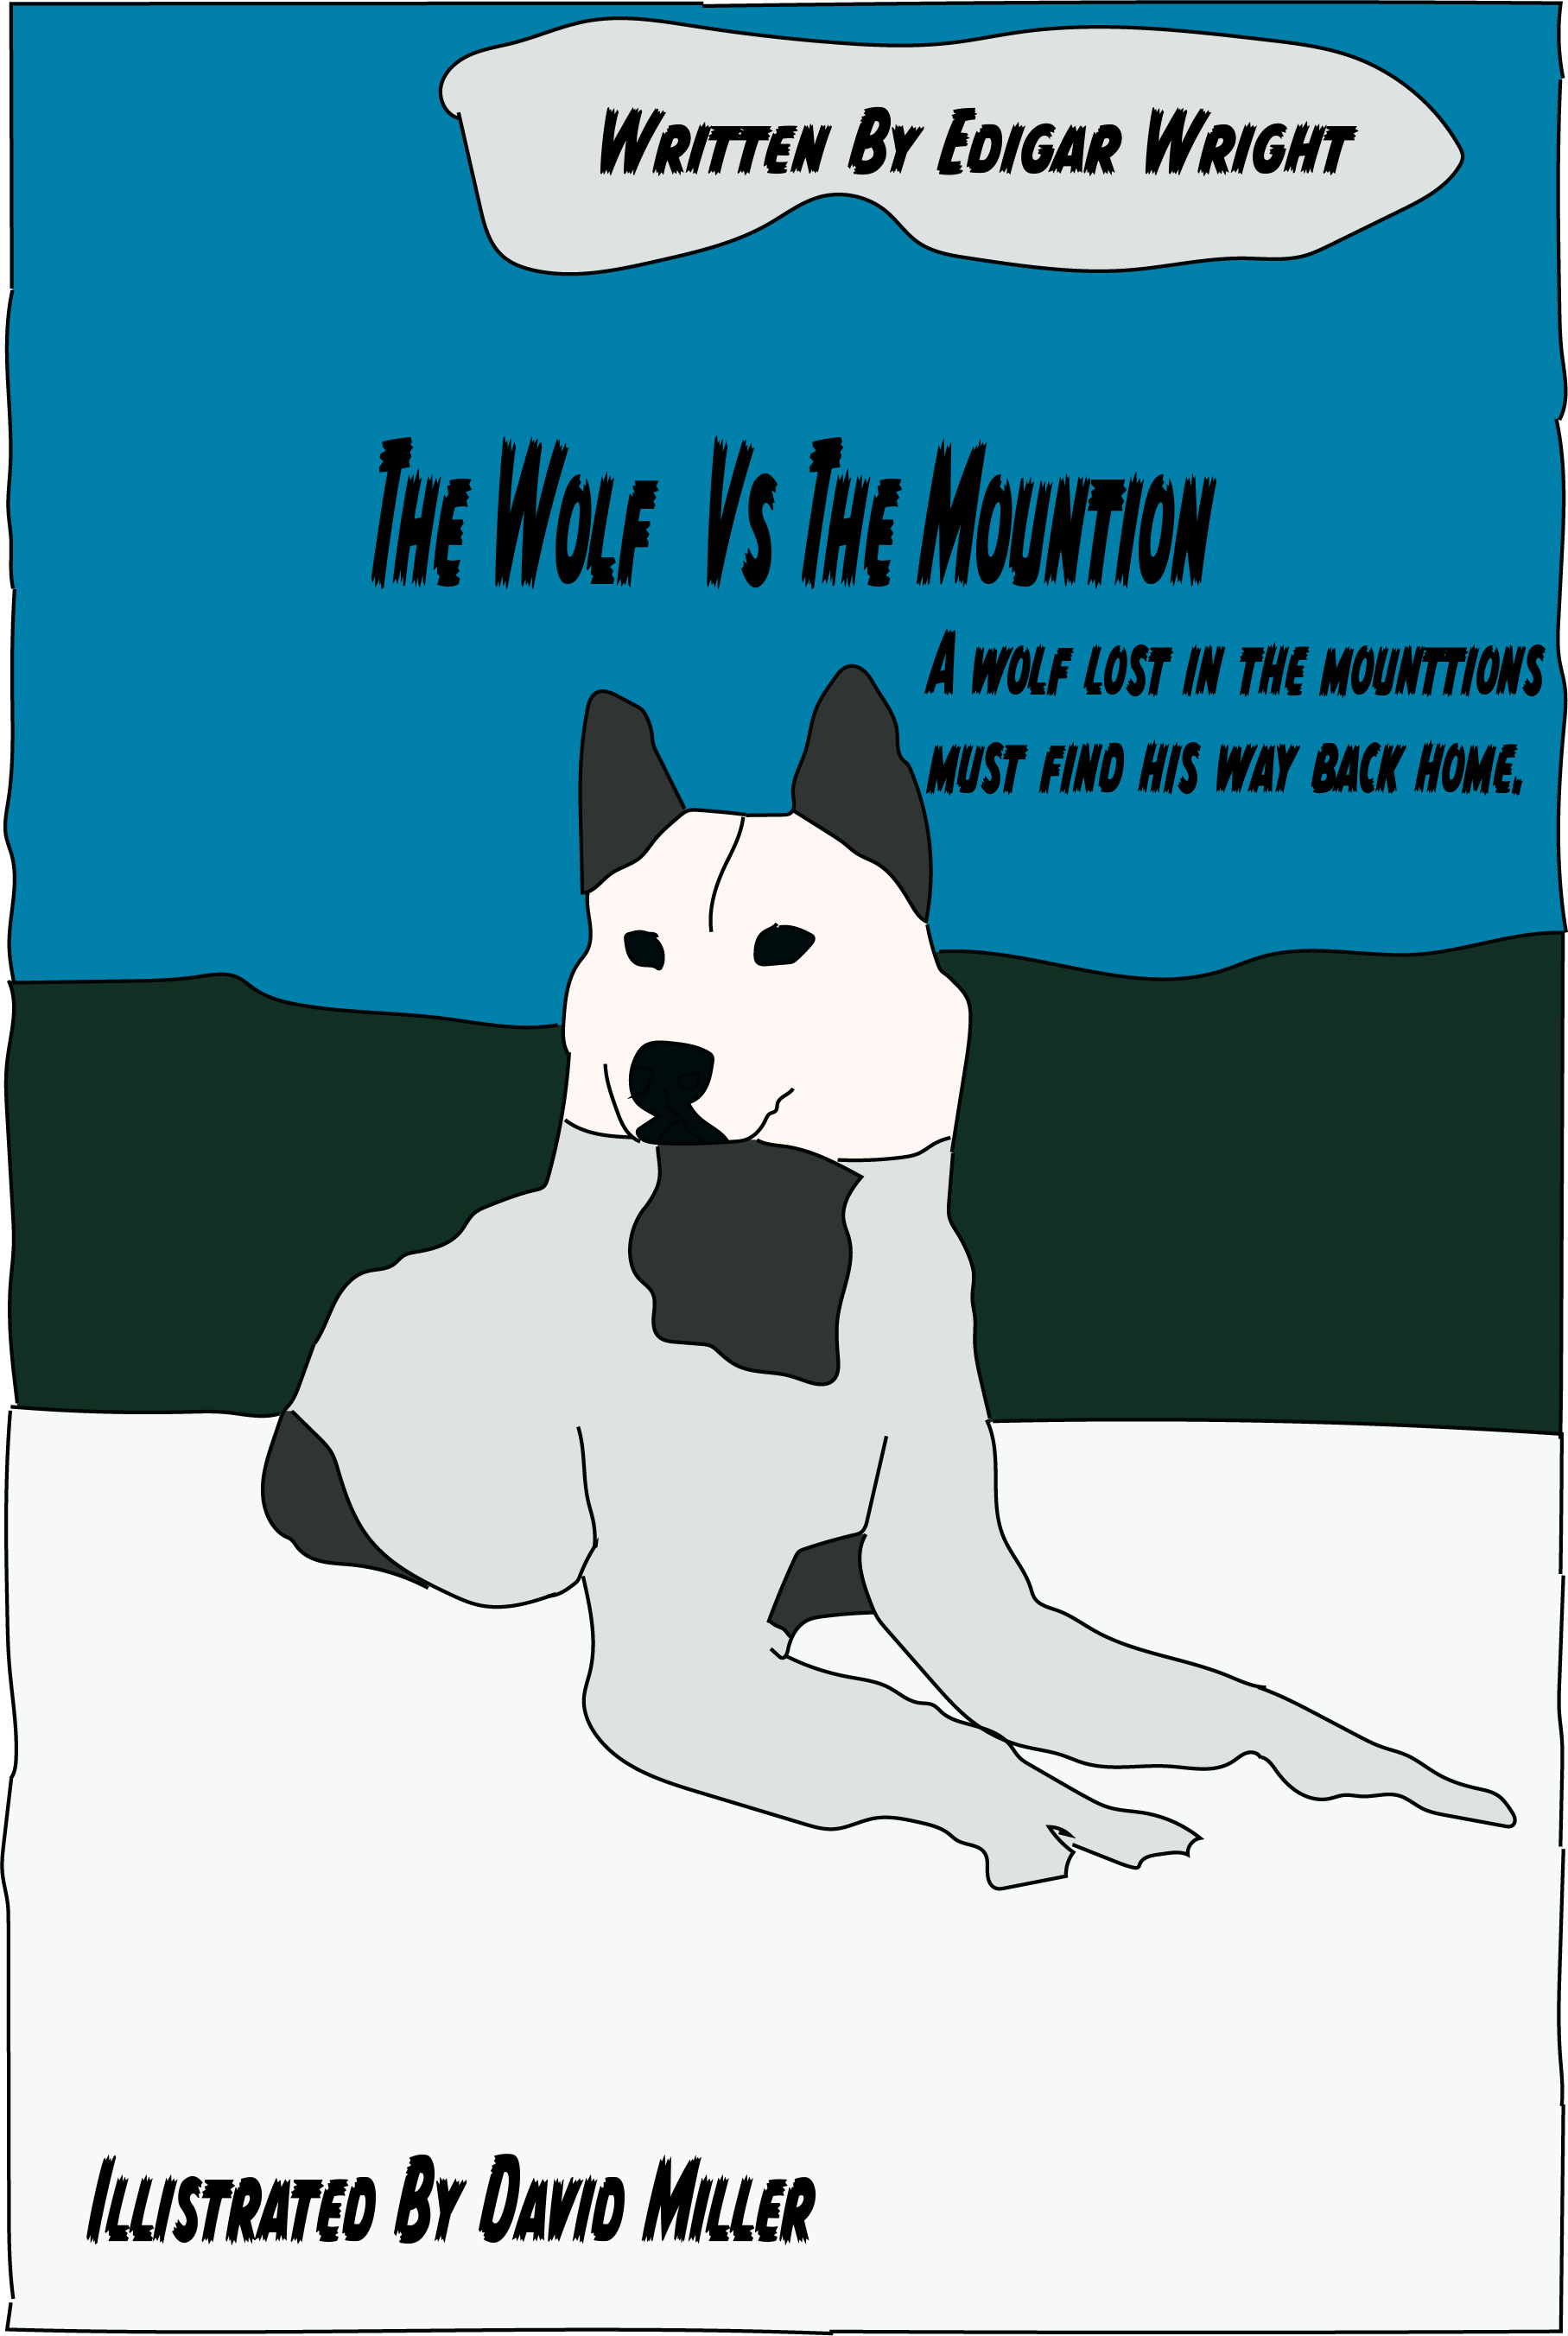 The Wolf Vs The Mountion